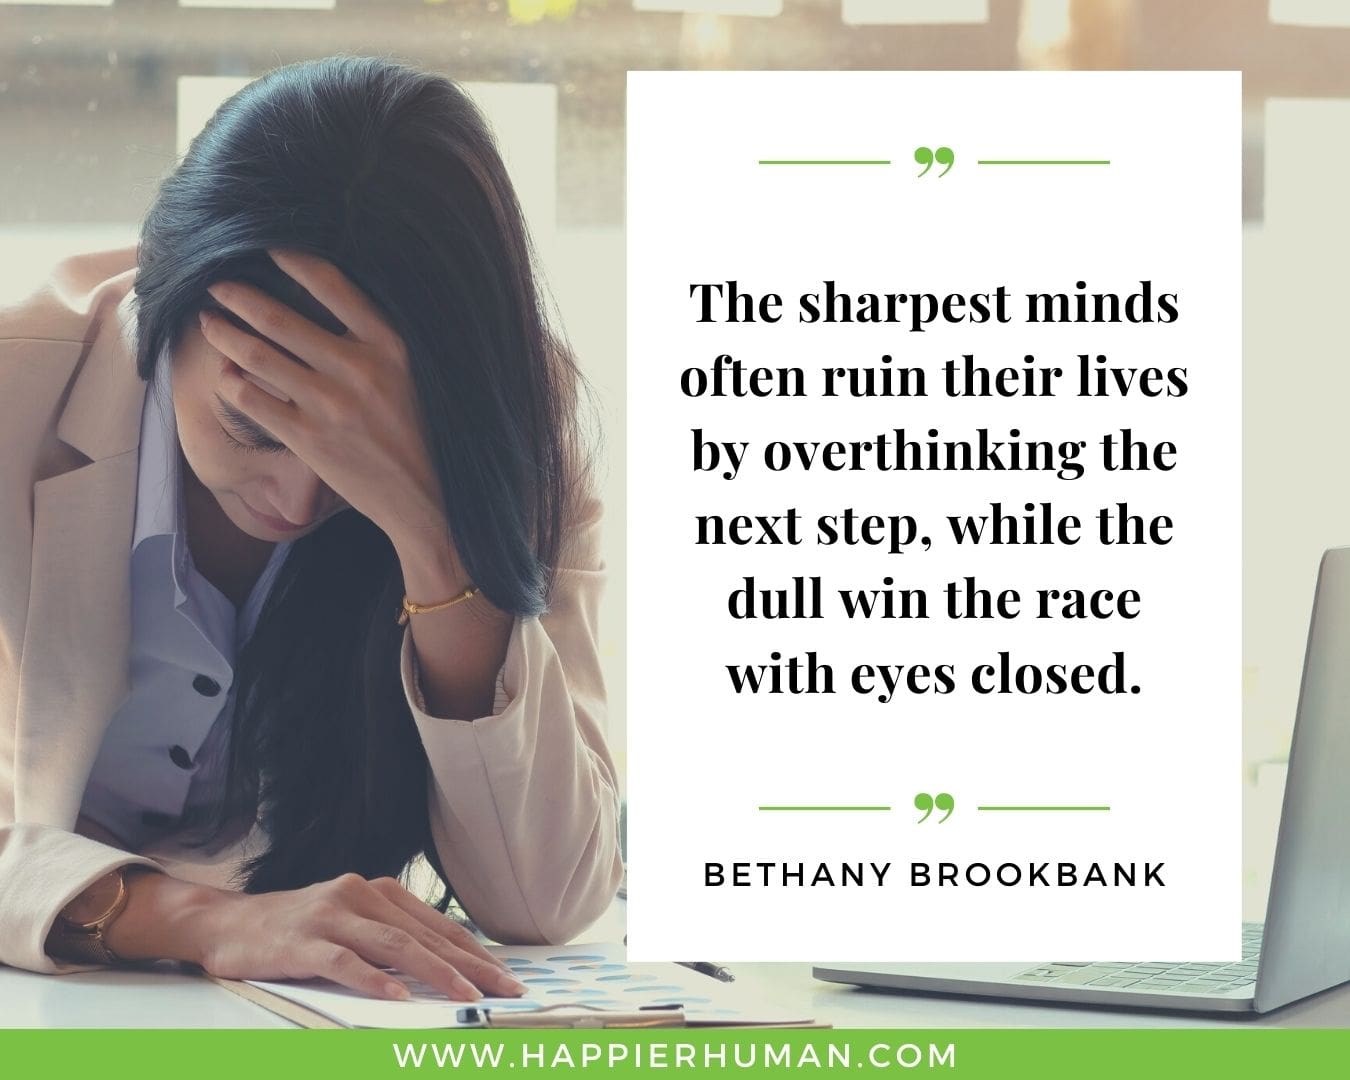 Overthinking Quotes - “The sharpest minds often ruin their lives by overthinking the next step, while the dull win the race with eyes closed.” - Bethany Brookbank